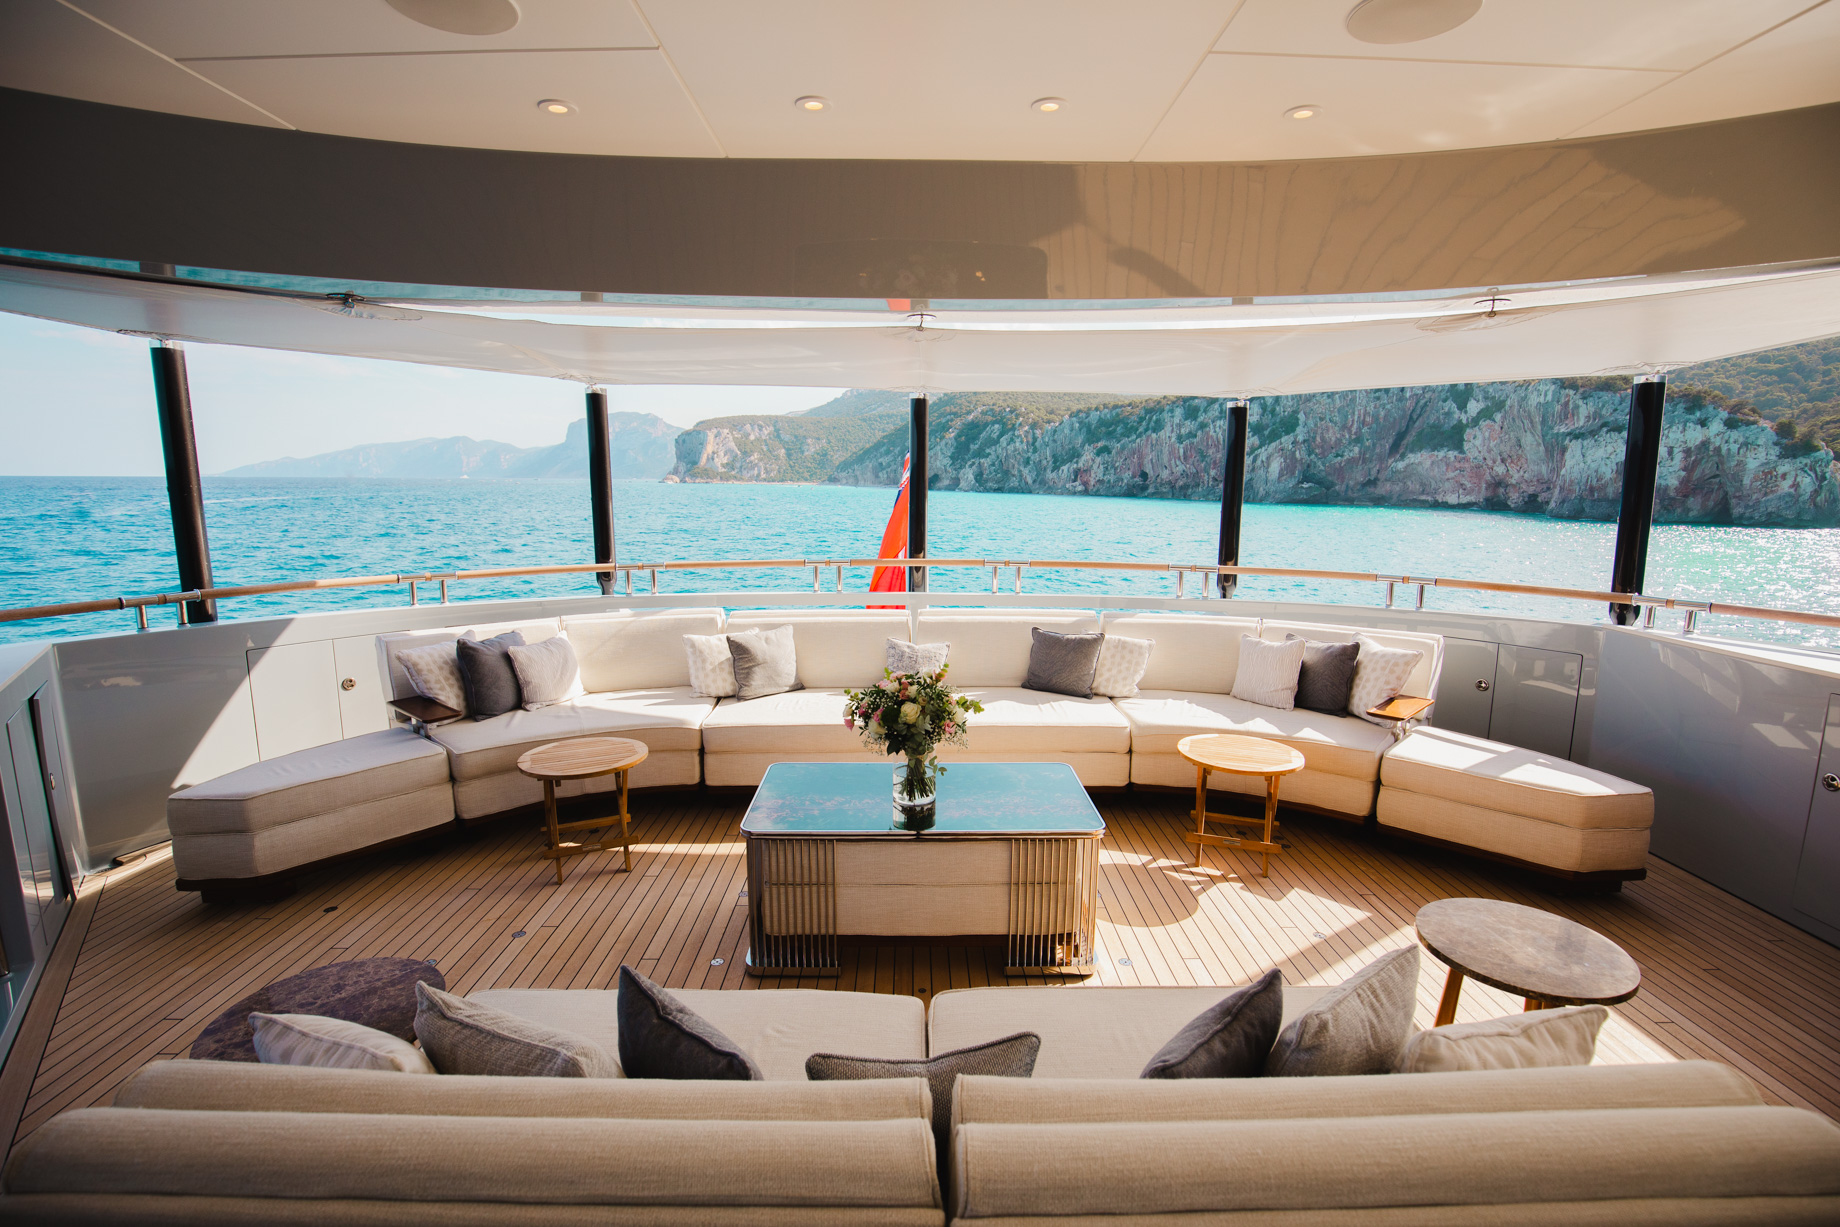 Enjoy a Caribbean Experiential Yachting Adventure Aboard M/Y AFTER YOU